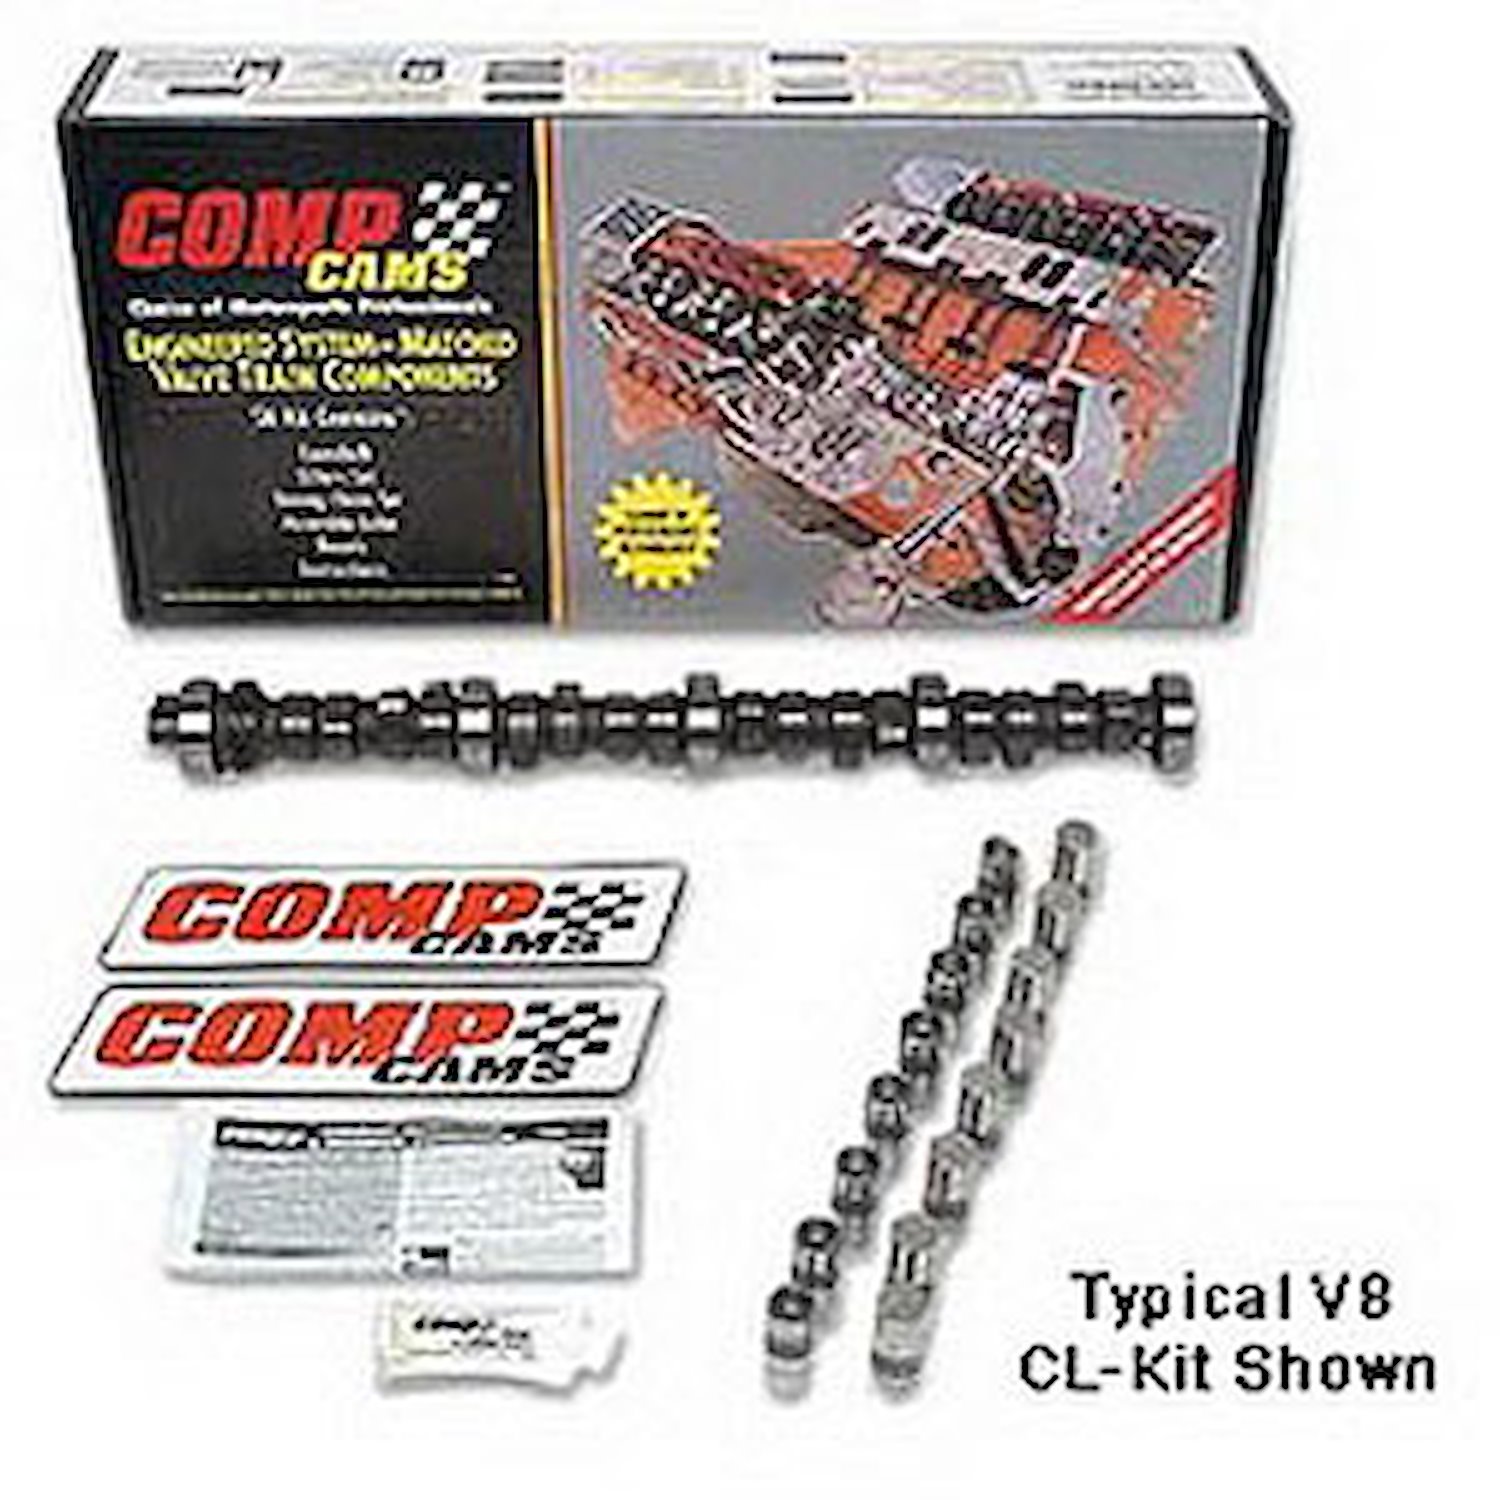 Mutha" Thumpr Hydraulic Flat Tappet Camshaft and Lifter Kit Lift .516"/.500" Duration 286/304 RPM Range 2200-6100